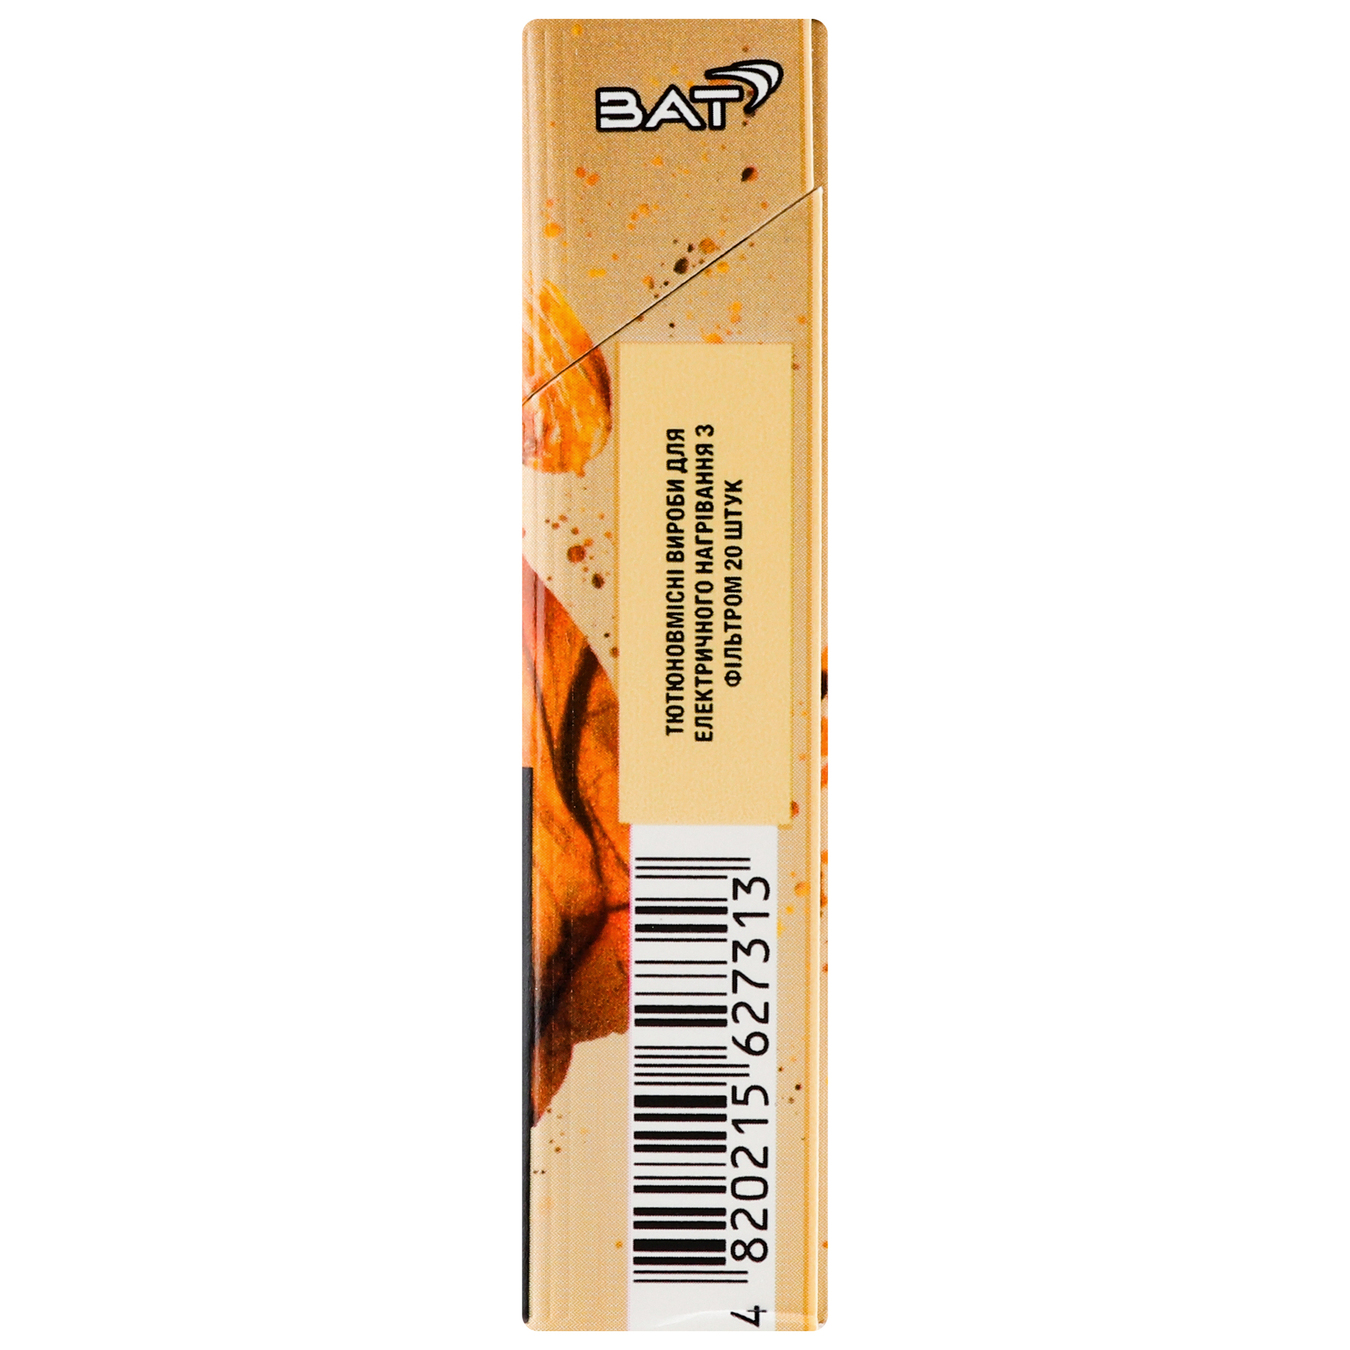 Sticks Neo Demi Smooth Tobbaco tobacco-containing 20pcs (the price is indicated without excise tax) 4